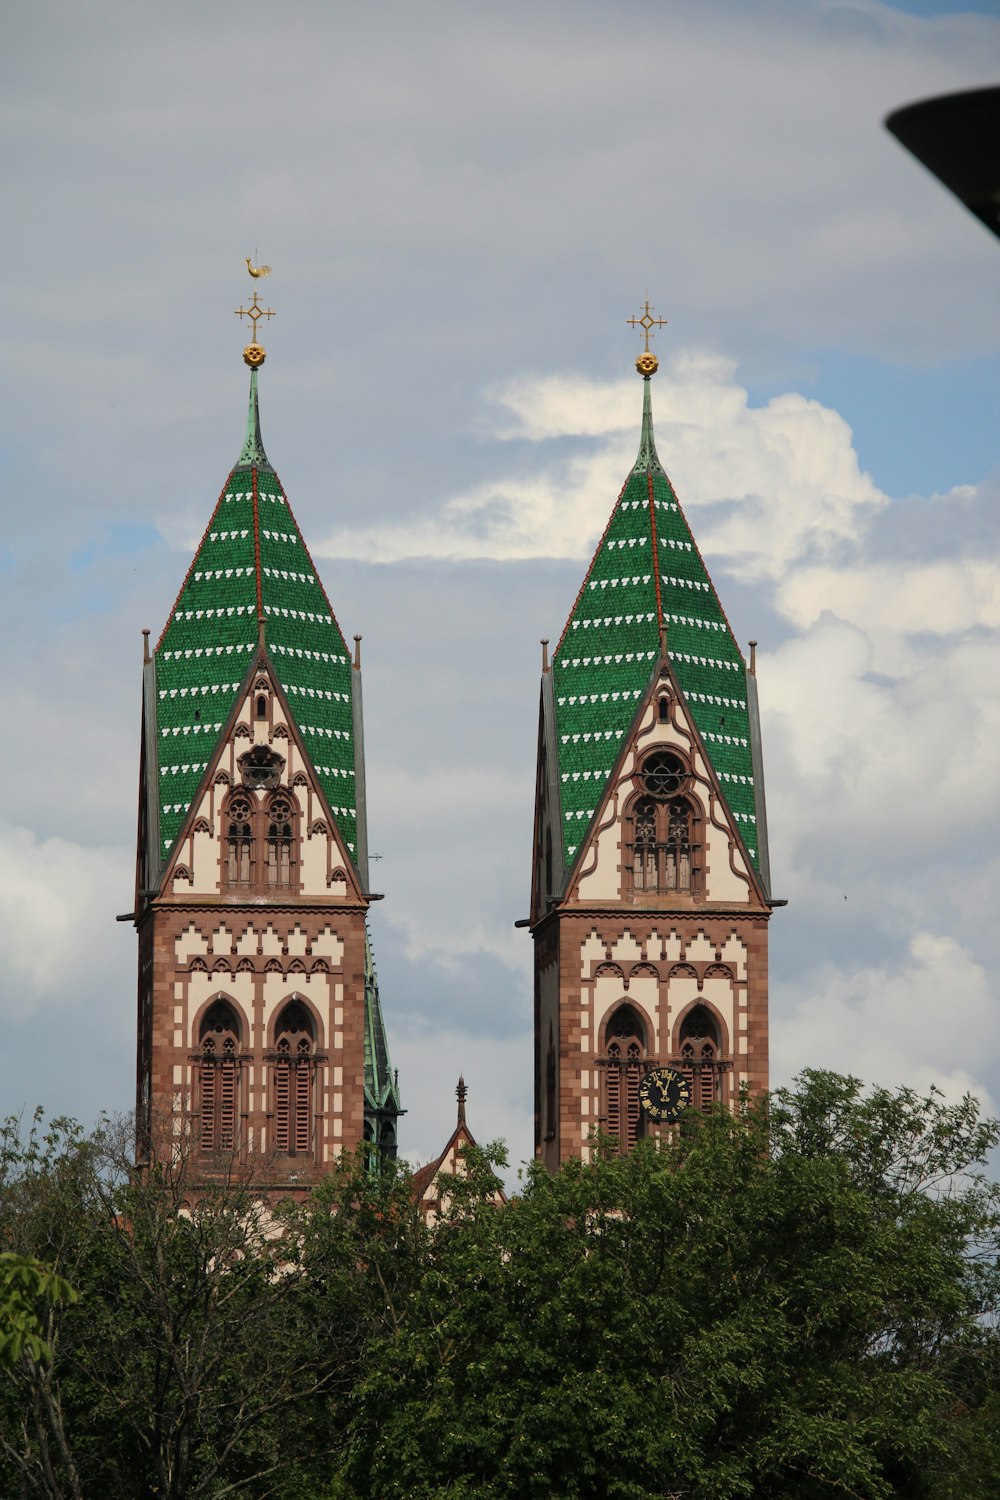 two towers of a building with a green roof